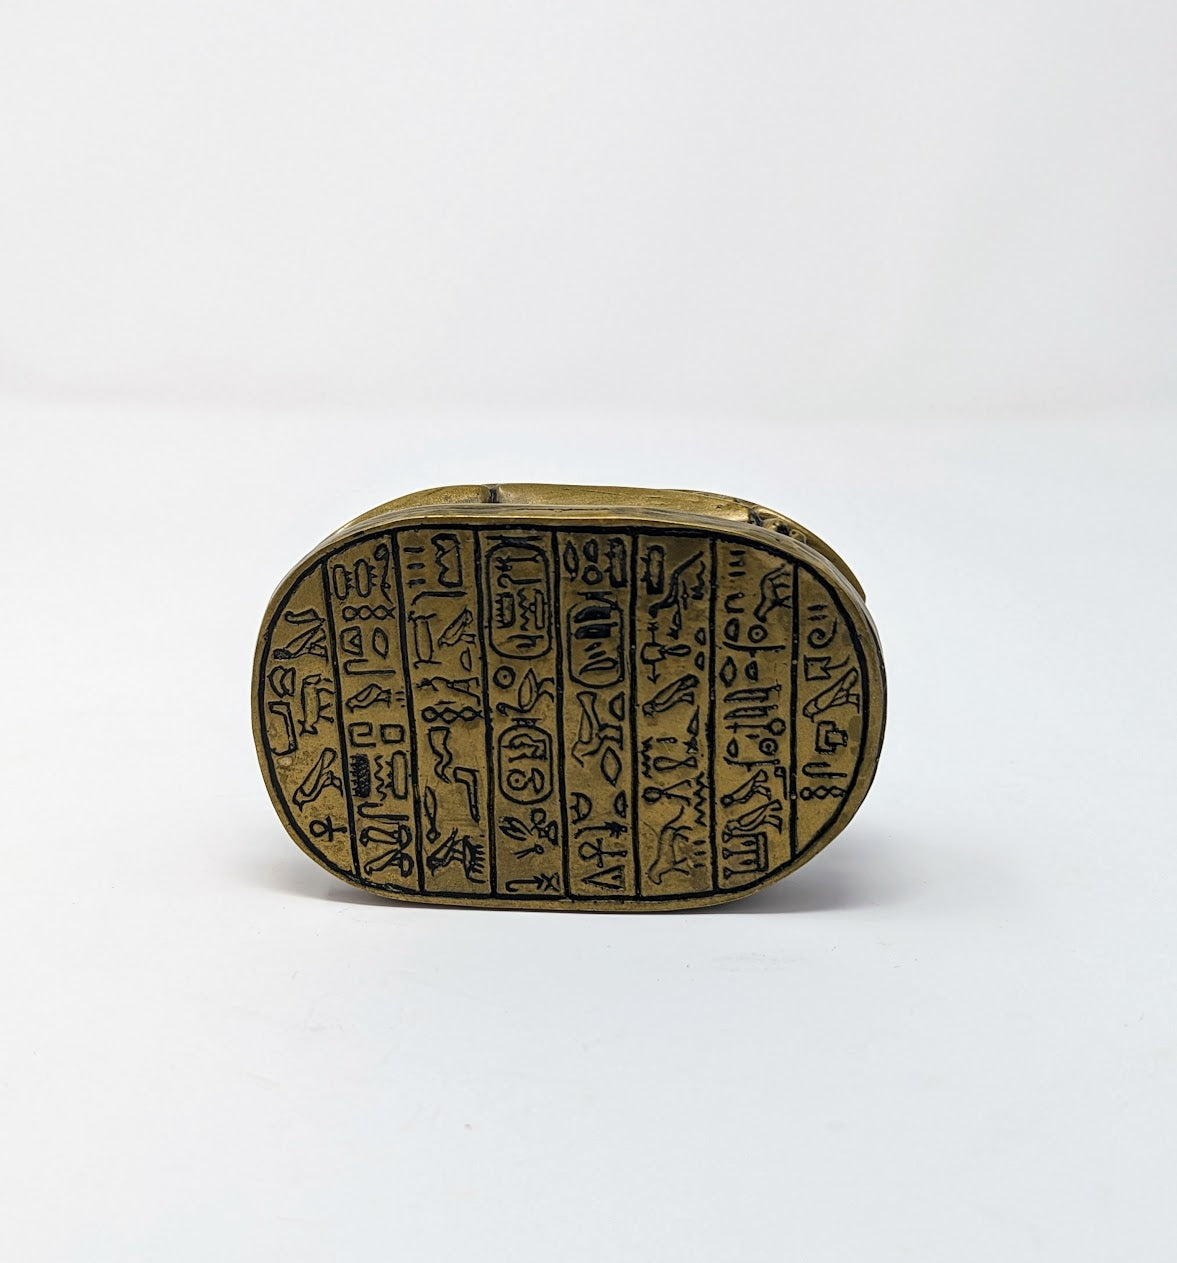 RARE Antique Grand Tour/Egyptian Revival Brass Scarab with Hieroglyphics